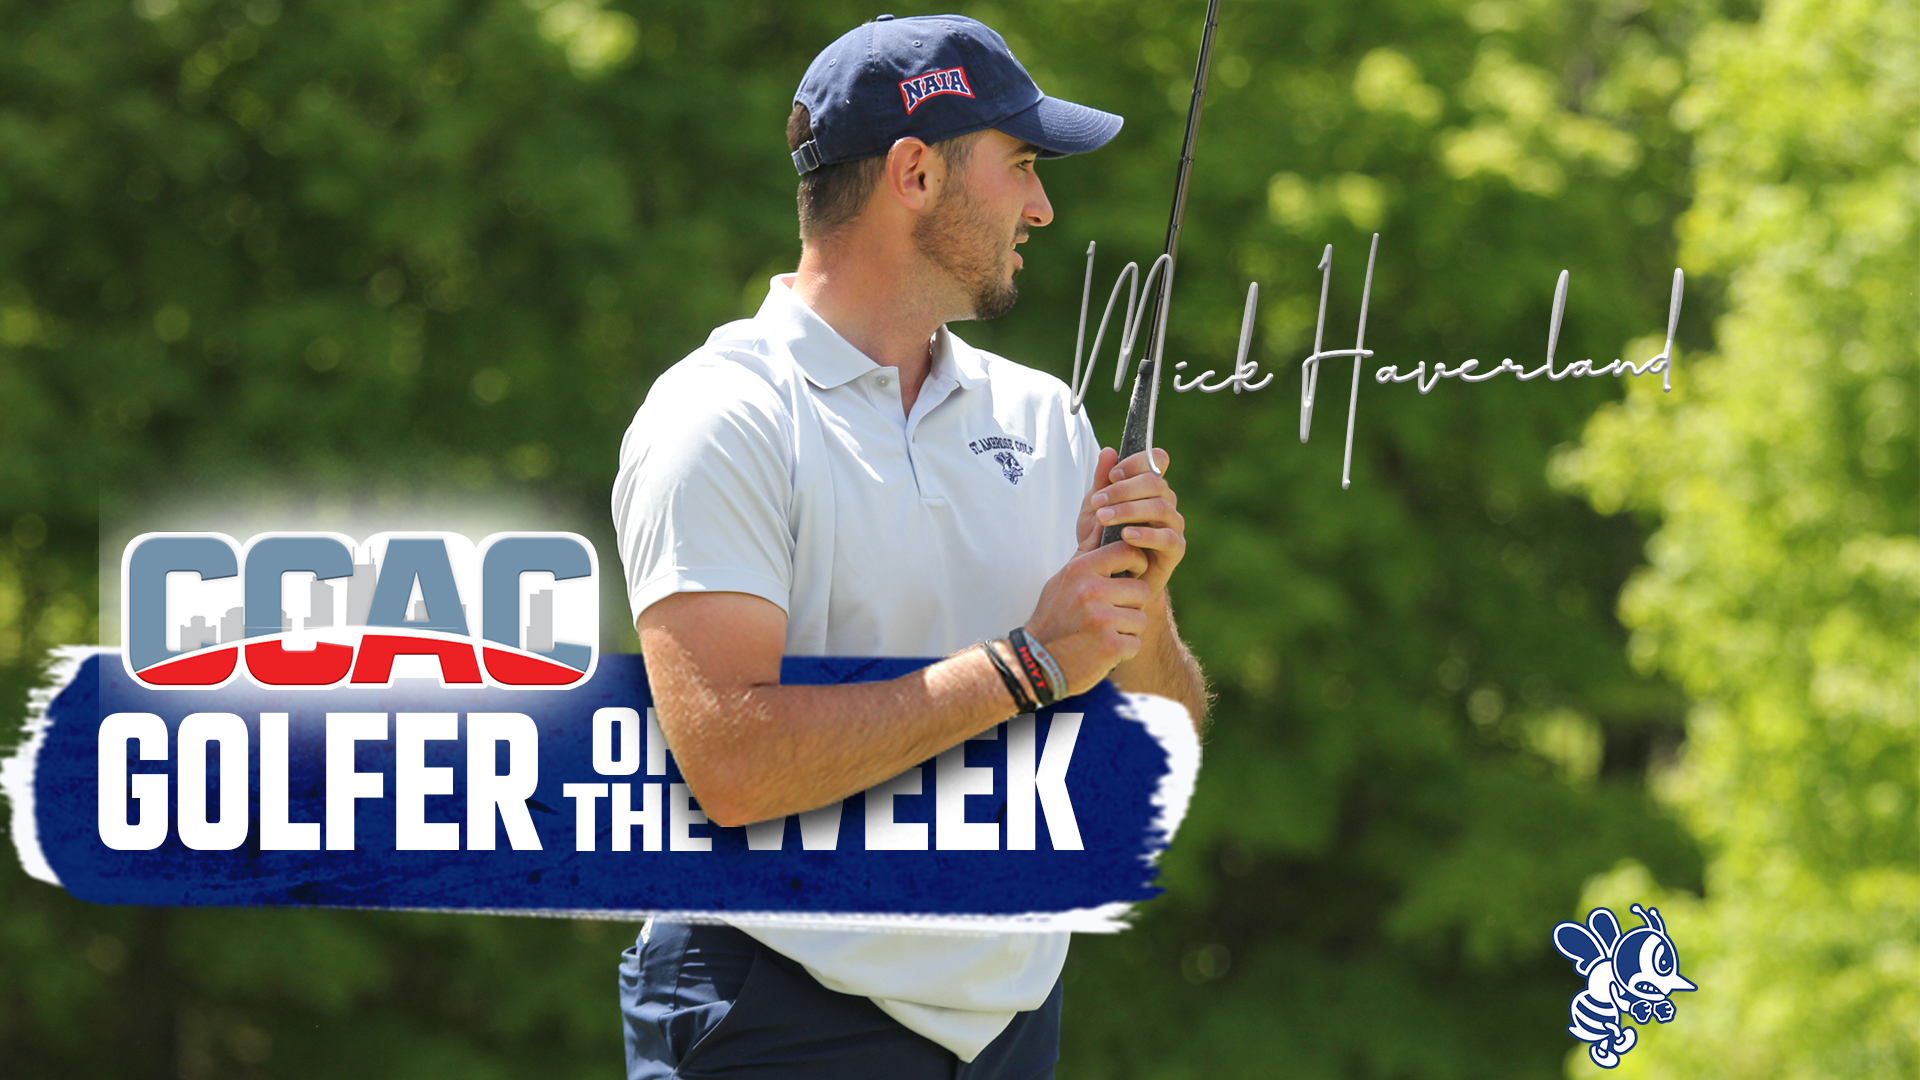 Haverland named CCAC Golfer of the Week